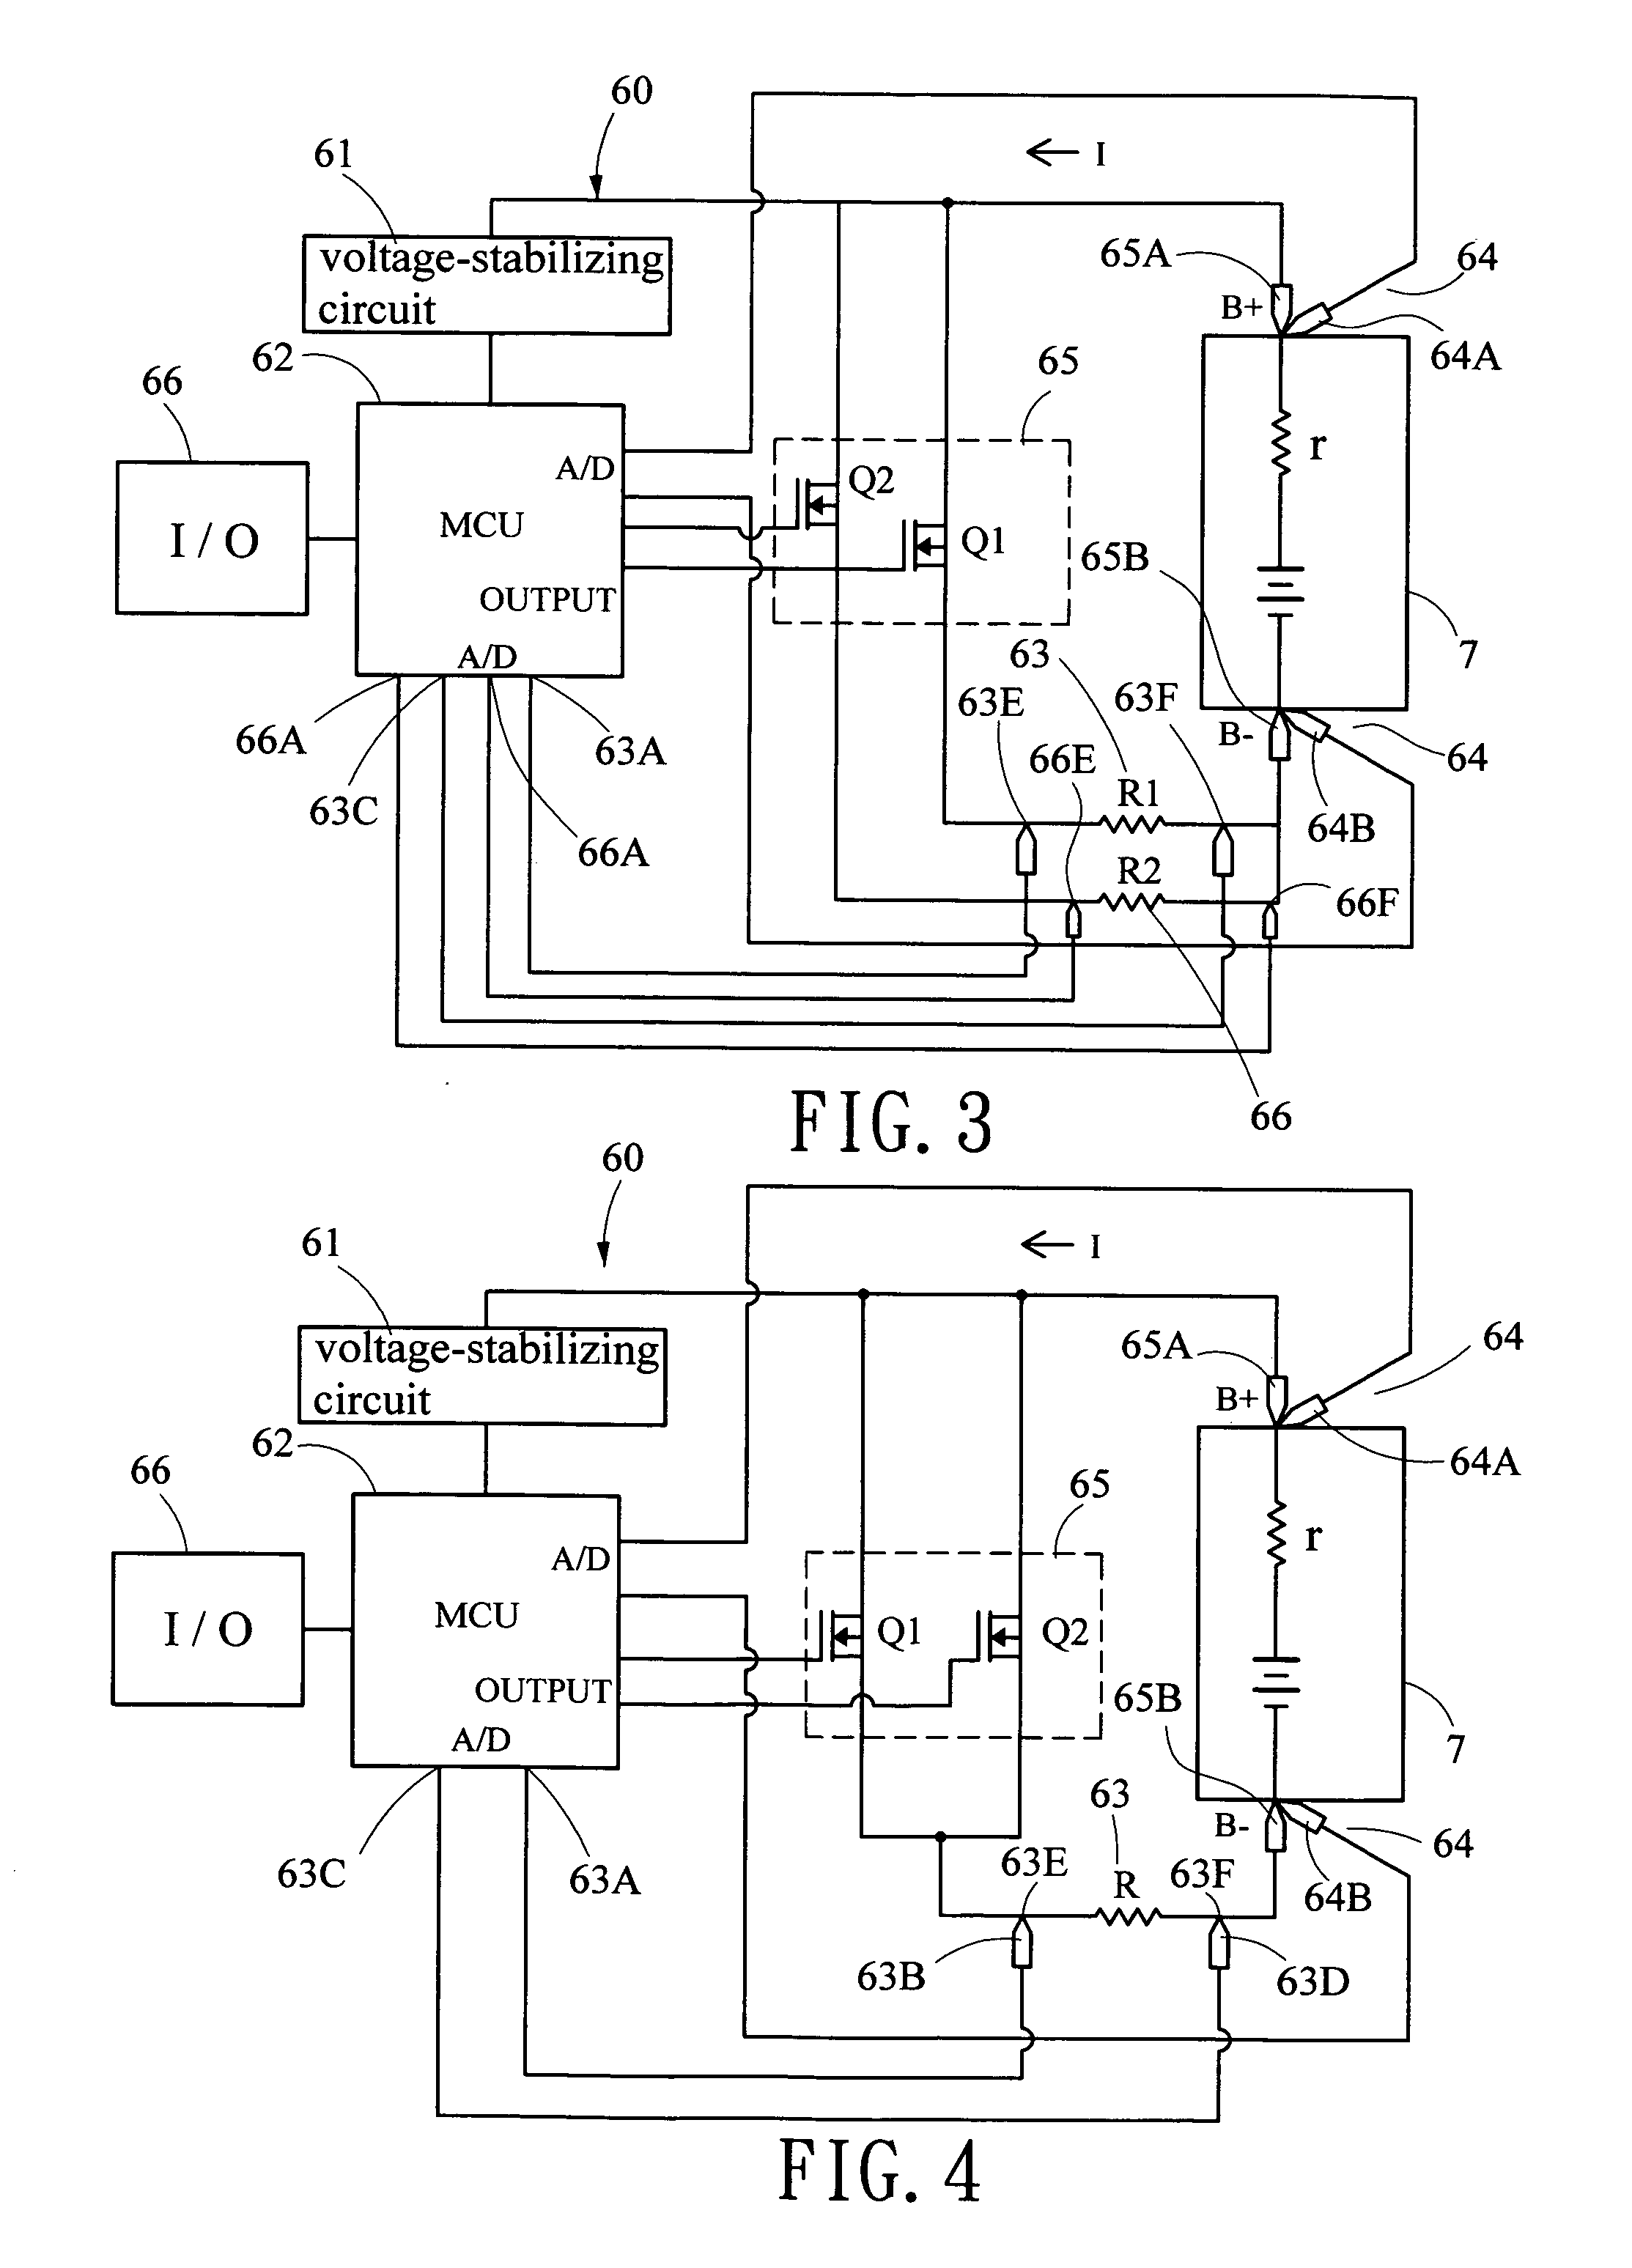 Method and apparatus for monitoring the condition of a battery by measuring its internal resistance